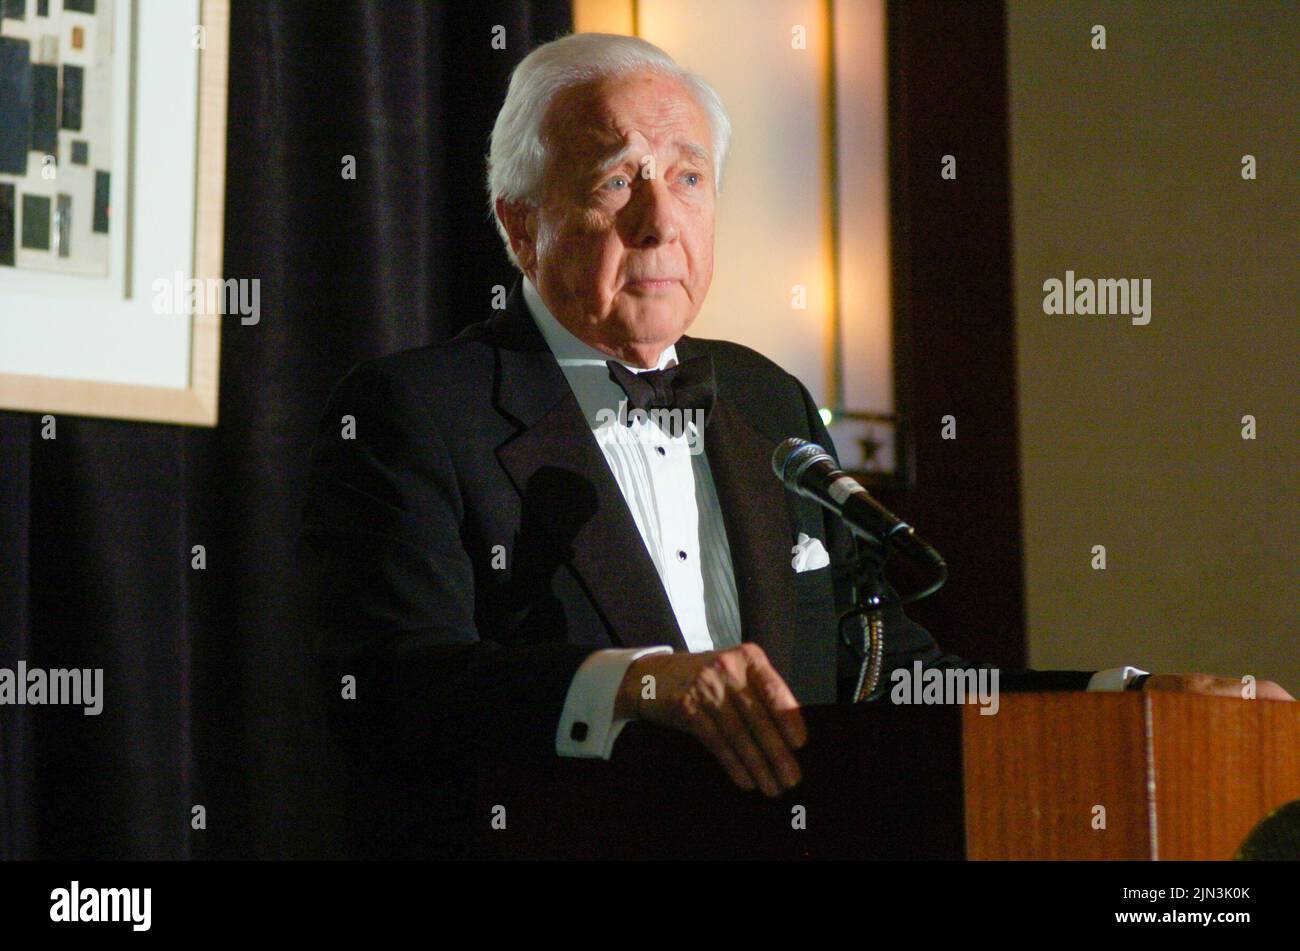 Author DAVID MCCULLOUGH, two-time Pulitzer Prize and National Book Award winner, whose best-selling biographies of Harry Truman and John Adams made him one of America’s most popular and acclaimed historians, died on Aug. 7, 2022, at age 89. McCullough, who won the prizes for biographies on Truman (1992) and Adams (2001), is pictured speaking at the 2005 Texas Book Festival gala, when he was a featured author at the event in Austin. ©Bob Daemmrich Stock Photo